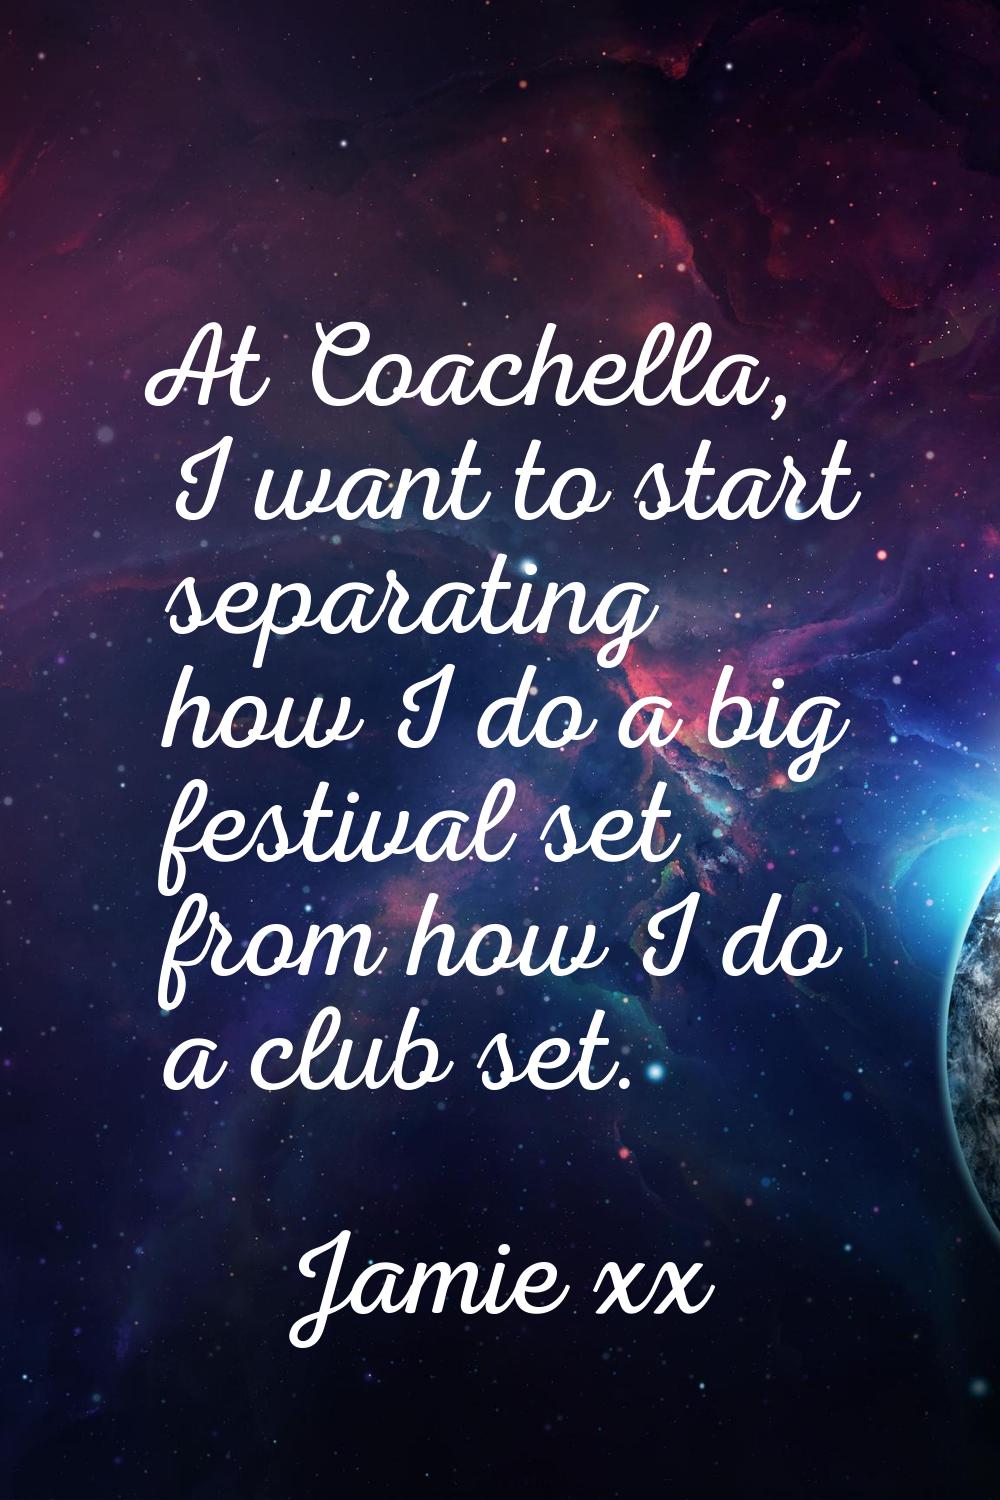 At Coachella, I want to start separating how I do a big festival set from how I do a club set.